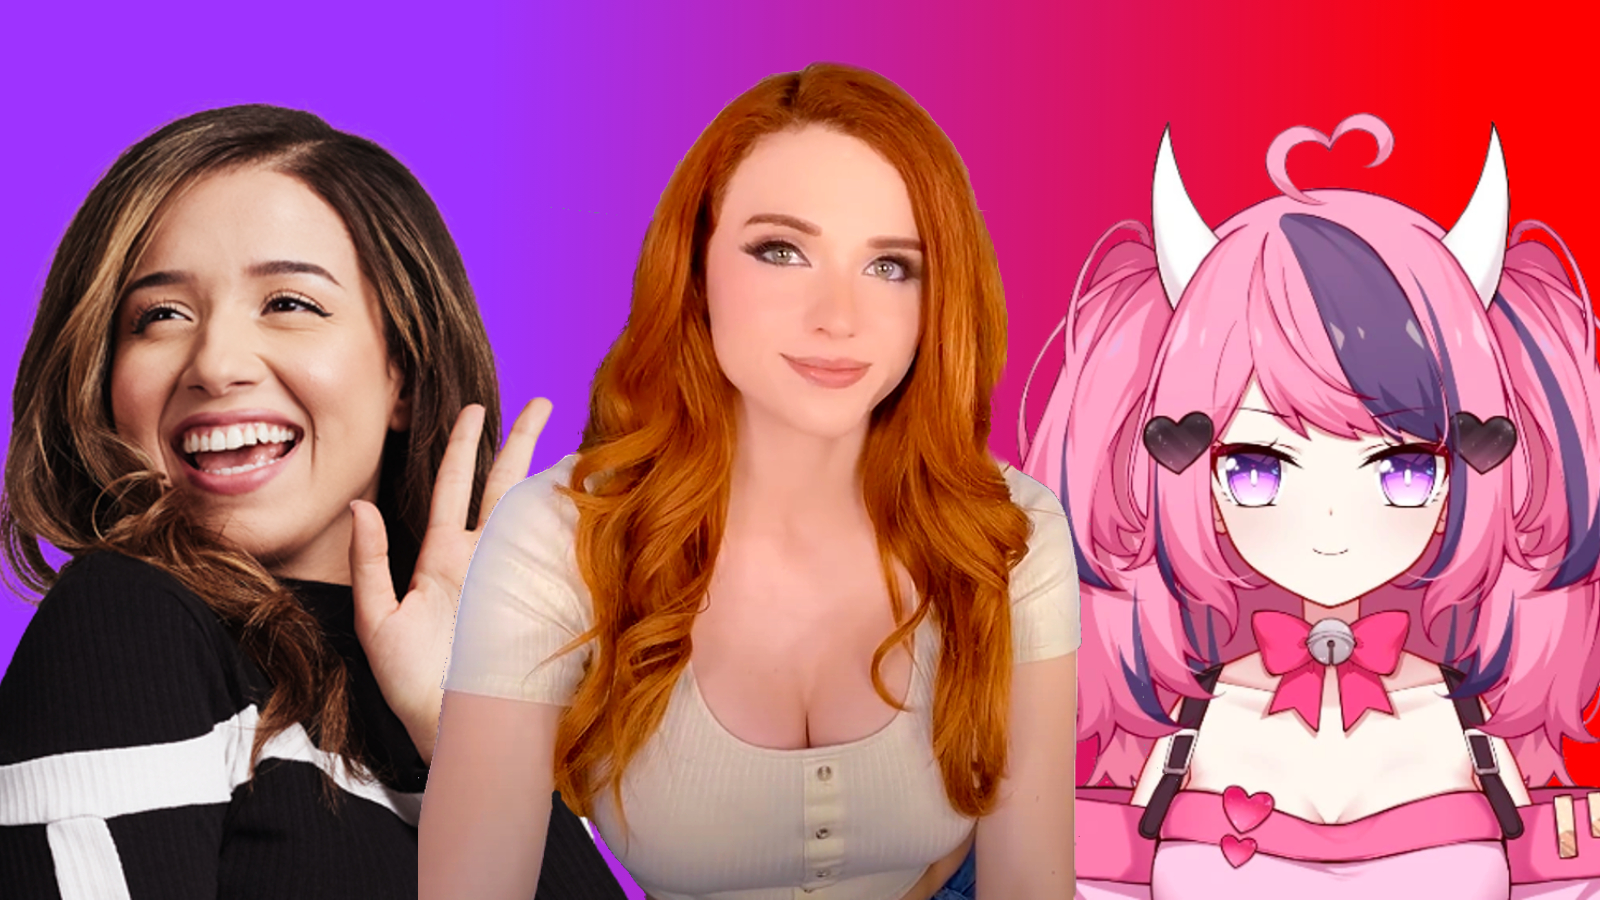 Mostwatched female Twitch streamers in 2022 Amouranth dominates